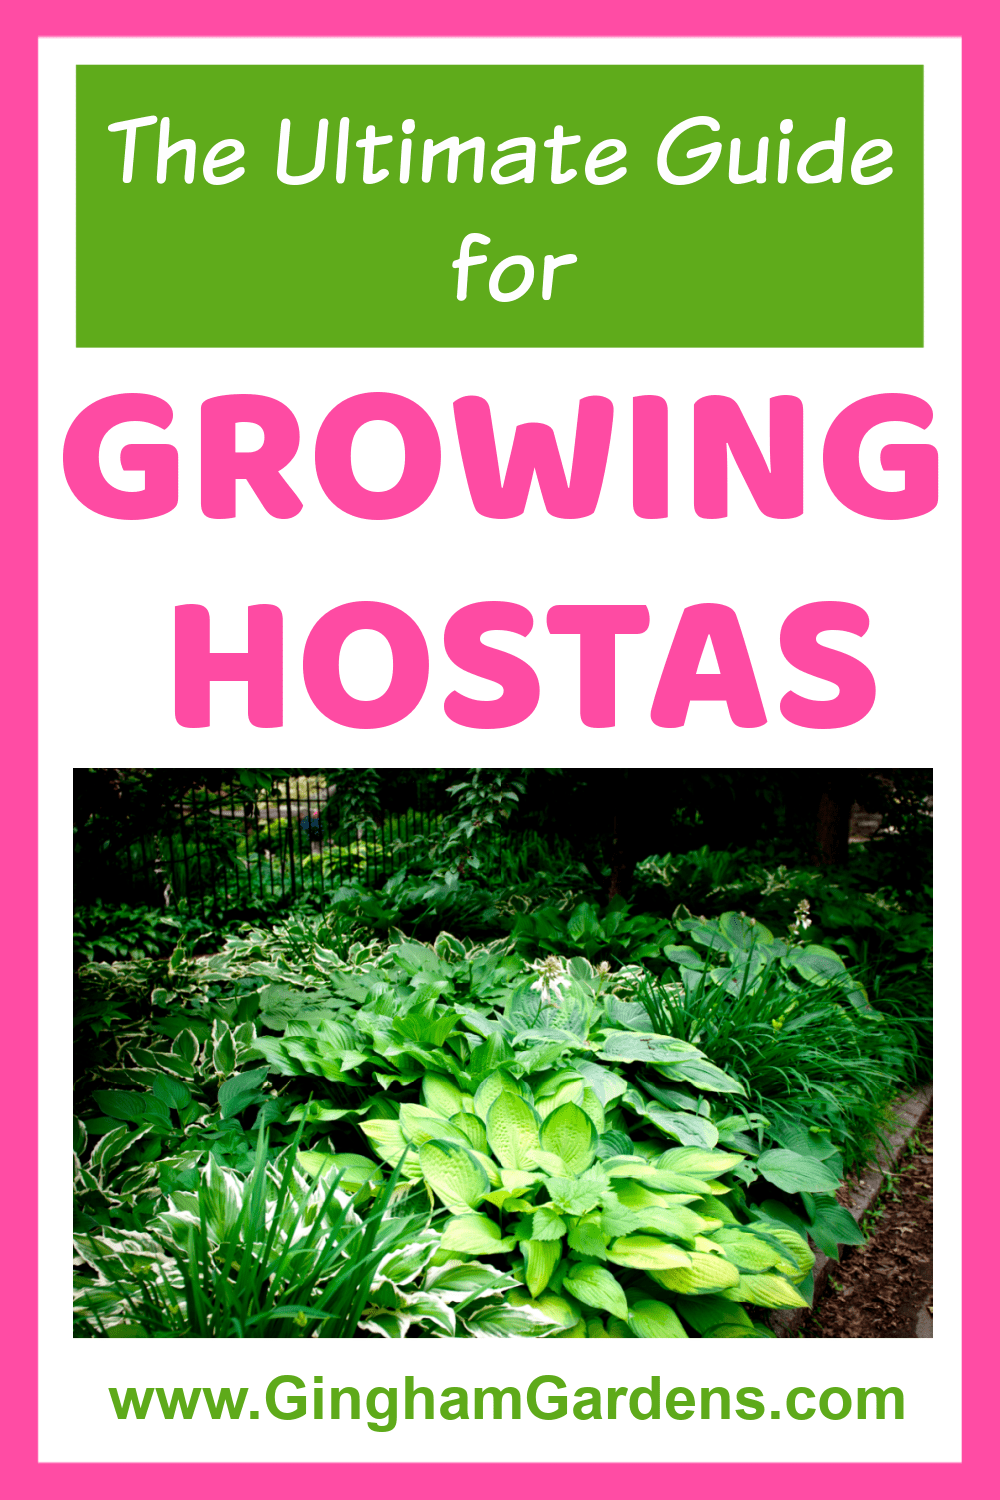 Image of a Hosta Garden with text overlay - The Ultimate Guide for Growing Hostas